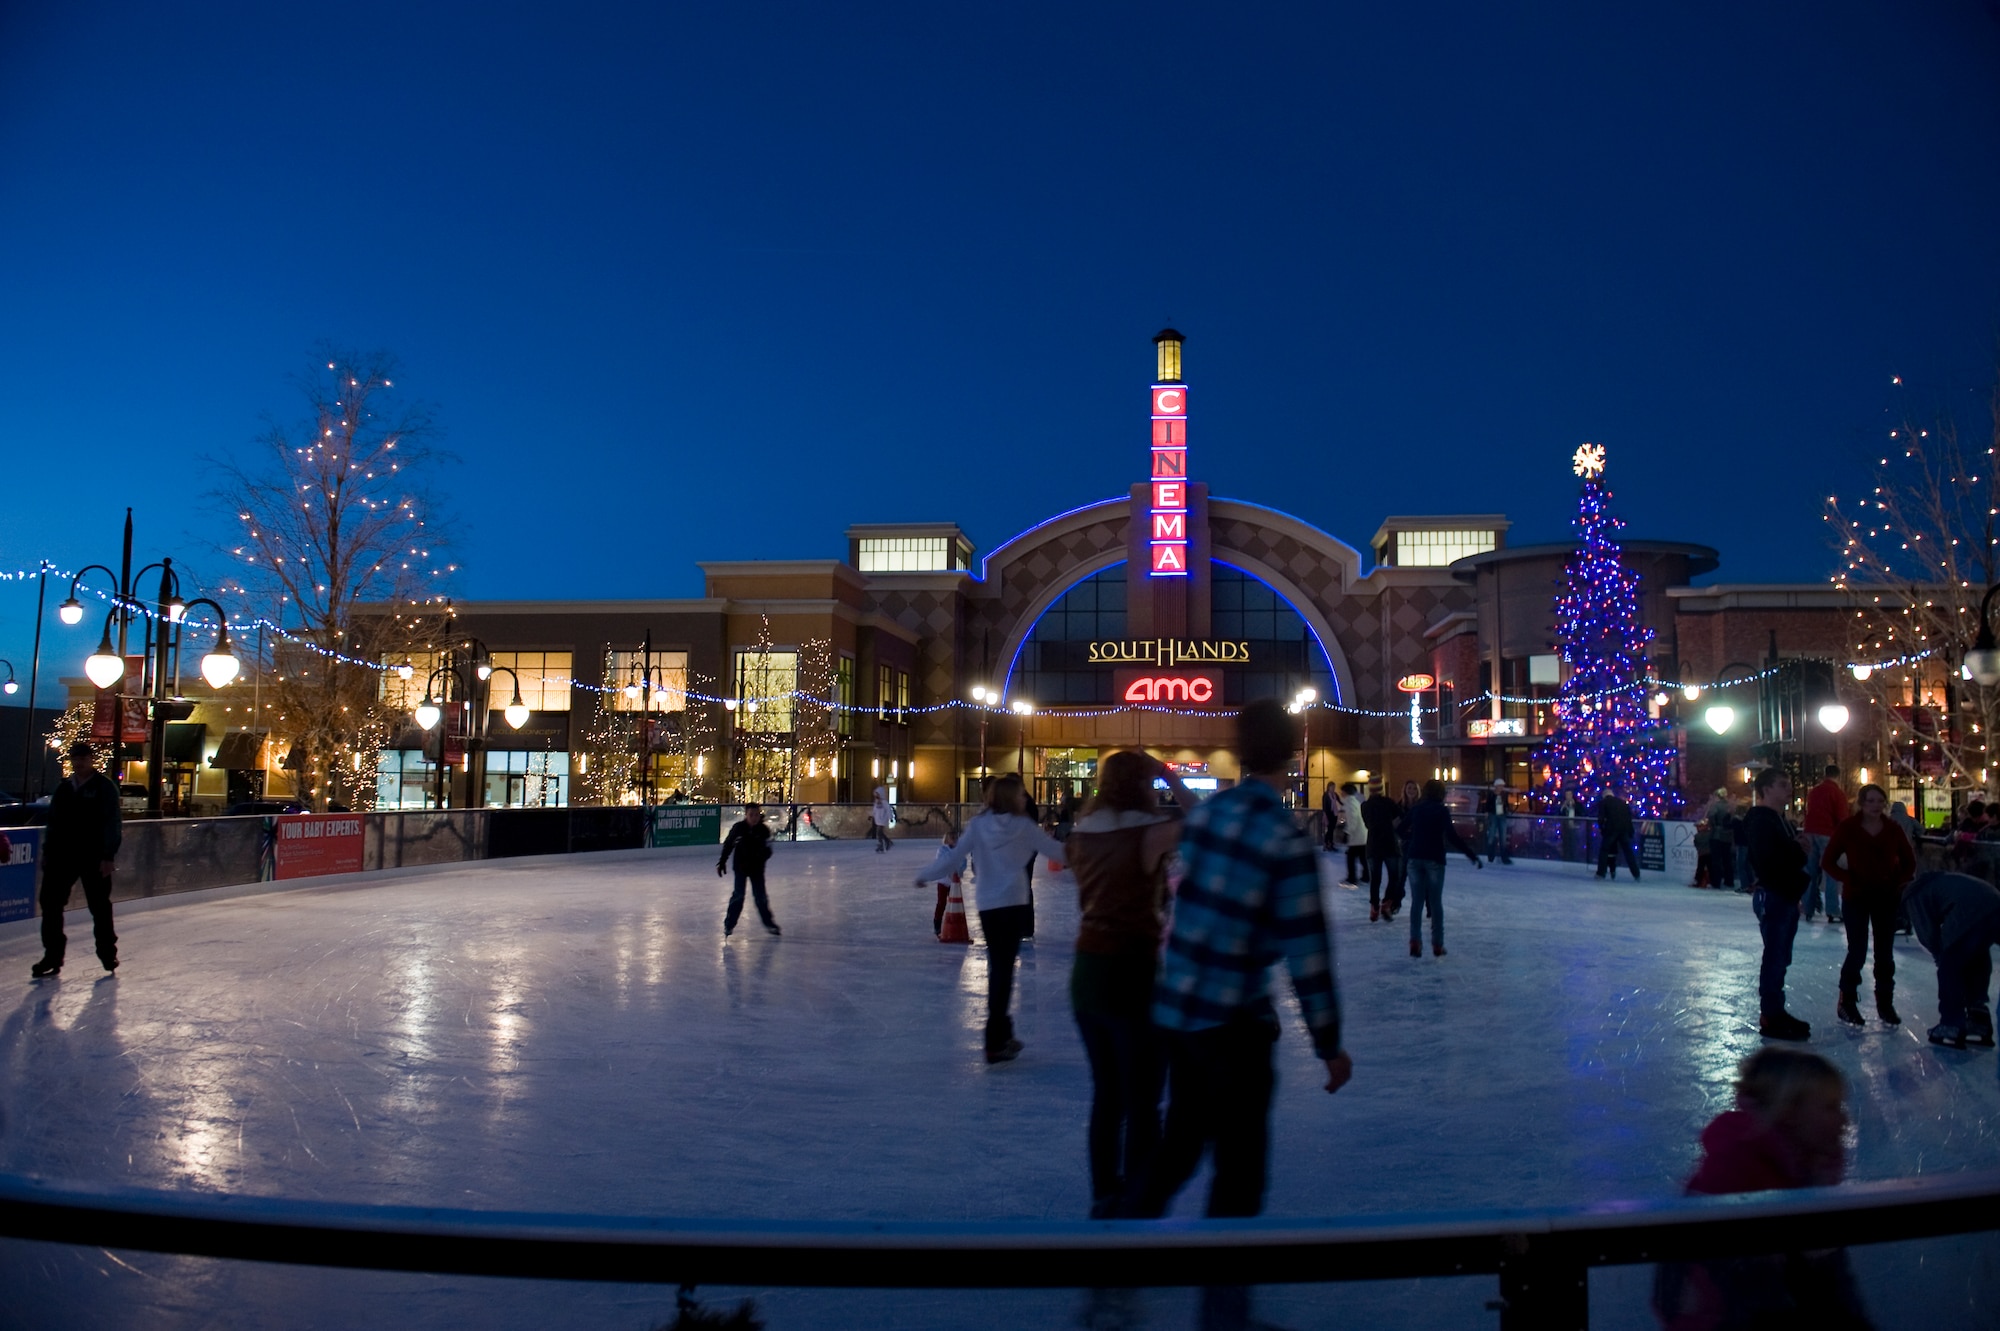 AURORA, Colo. – Skaters glide across the Southlands Shopping Center’s ice skating pond, Nov. 20, 2012, in front of the cinema. Operating hours for the pond are 4 to 9 p.m. weekdays, 11 a.m. to 10 p.m. Saturdays and 11 a.m. to 7 p.m. Sundays. (U.S. Air Force photo by Airman 1st Class Riley Johnson)